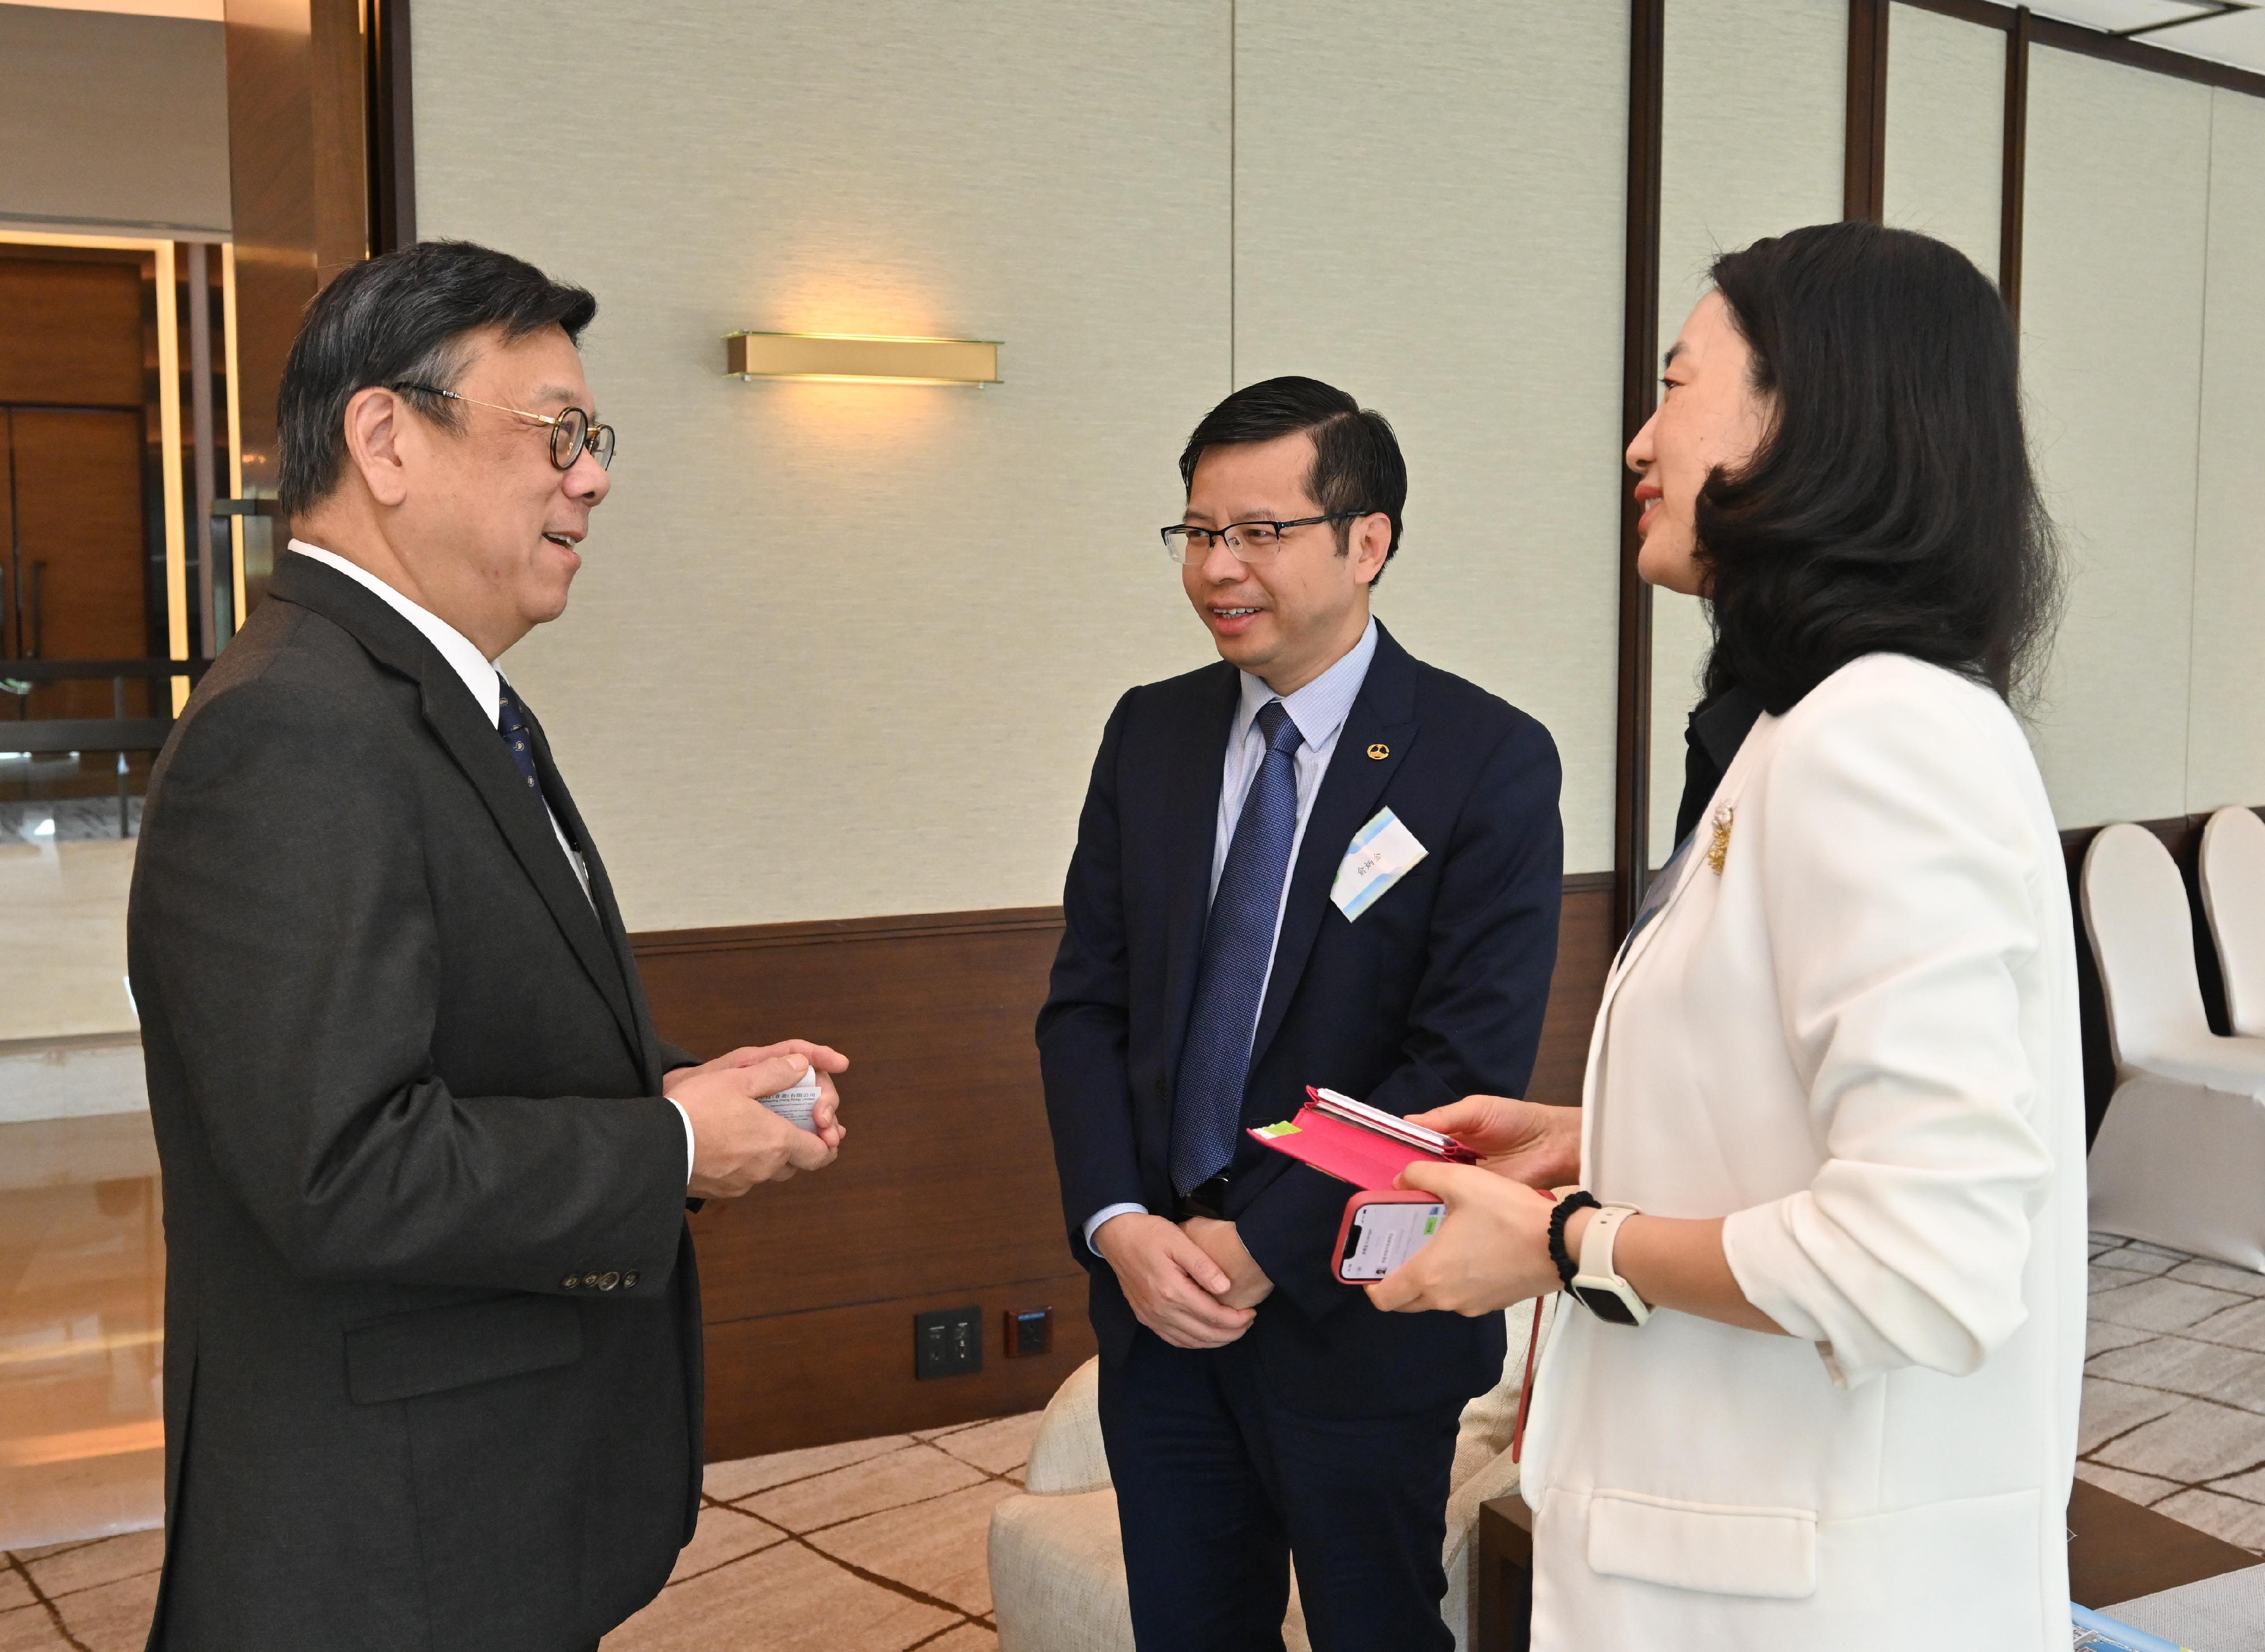 The Commerce and Economic Development Bureau in conjunction with the Hong Kong Chinese Enterprises Association organised the Mainland Enterprises Partnership Exchange and Interface Session today (July 31). Photo shows the Secretary for Commerce and Economic Development, Mr Algernon Yau (left), exchanging views with representatives of participating organisations and enterprises.